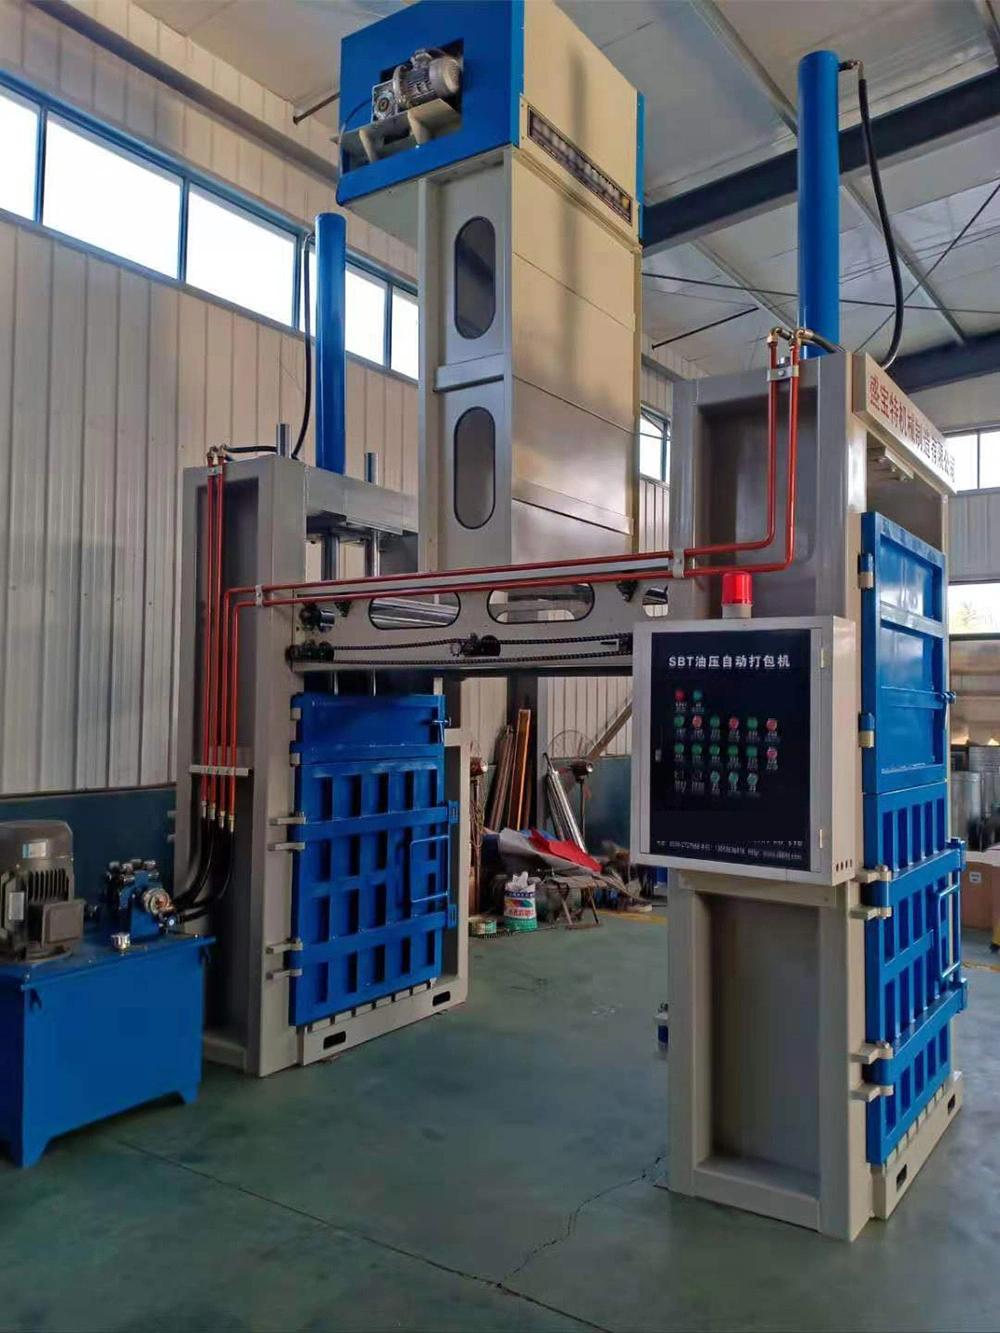 Factory Direct Sales Automatic Hydraulic Baler Is Fast, Baler